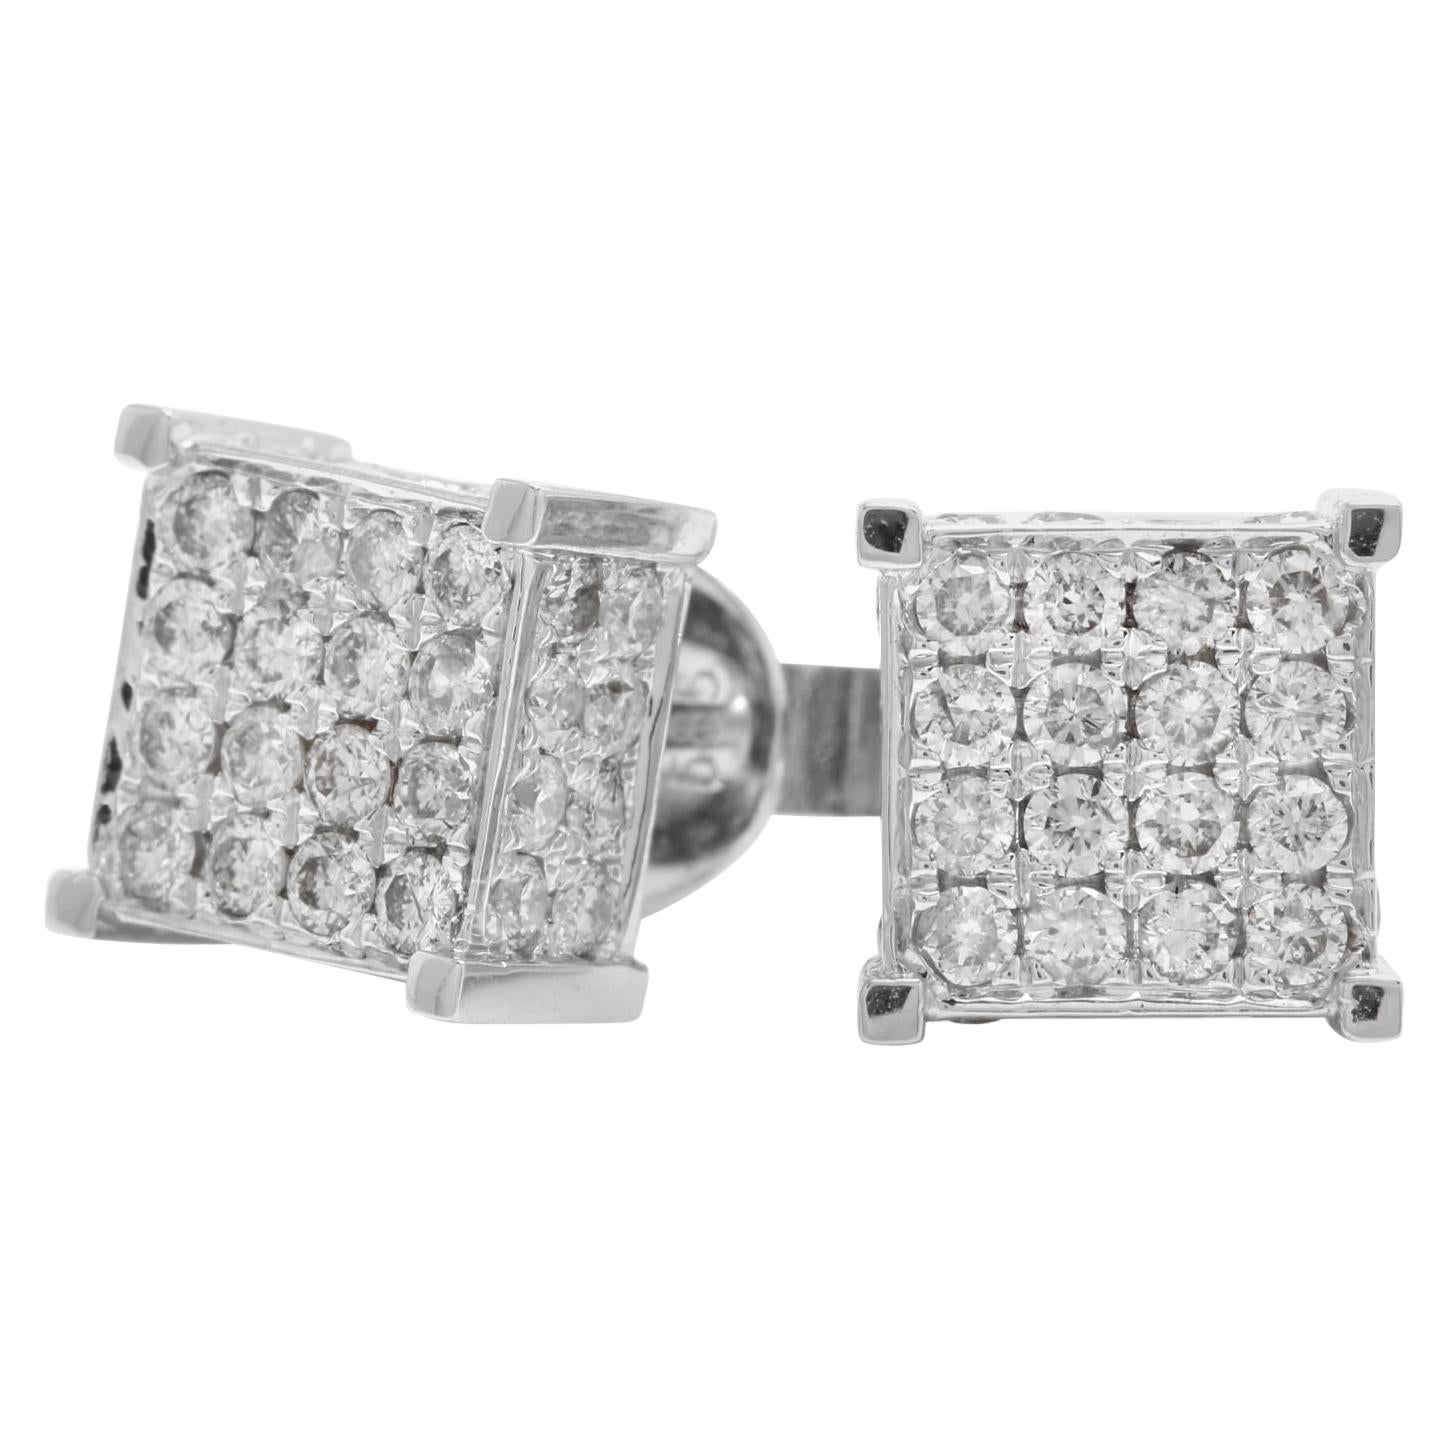 Exquisite 1.40 Carat Natural Diamond 14 Karat Solid White Gold Stud Earrings For Sale